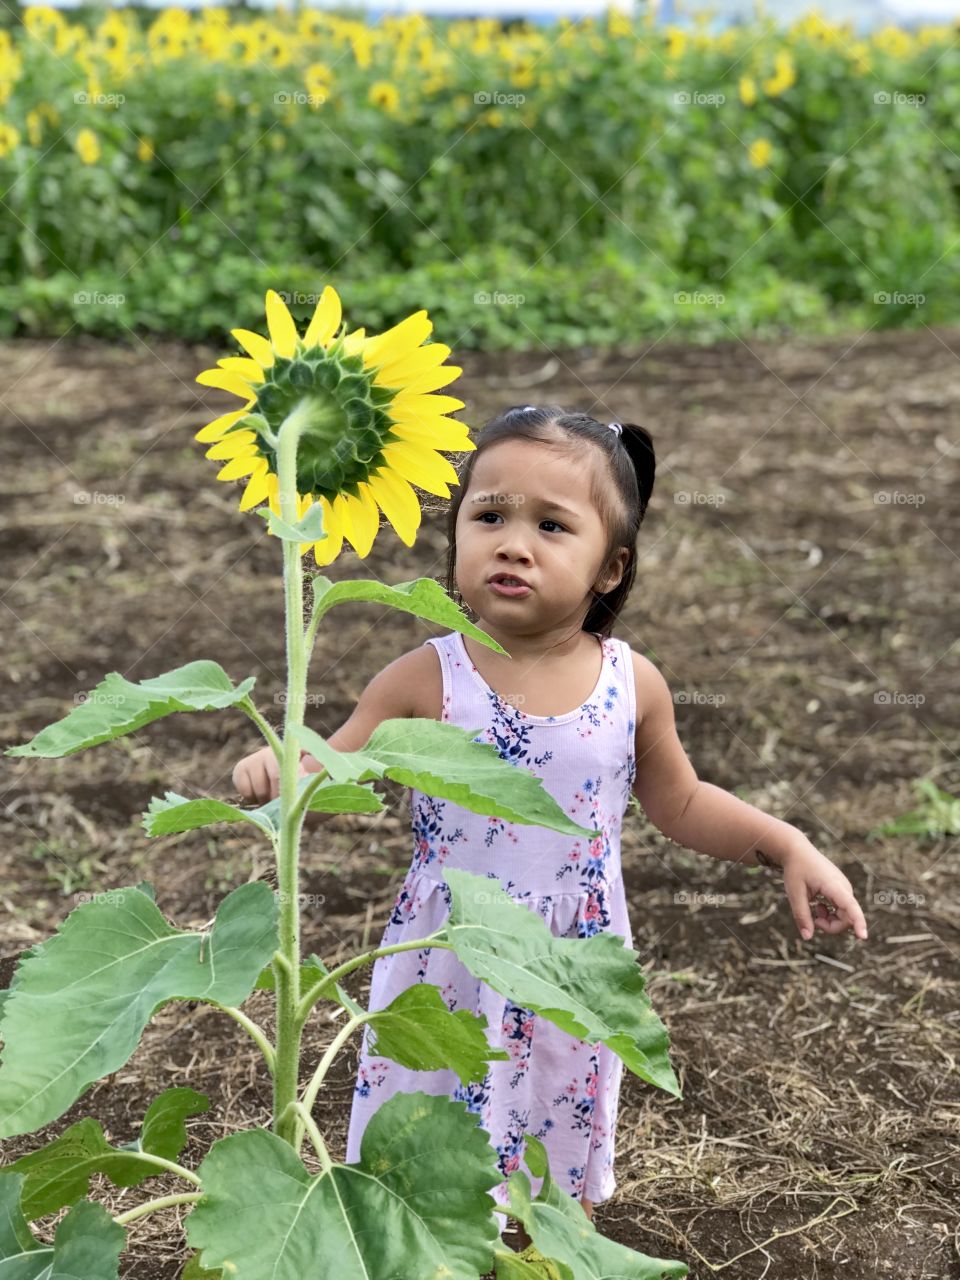 This 2 year old is curious about her  surroundings. She’s not sure if she should touch the flower :)  